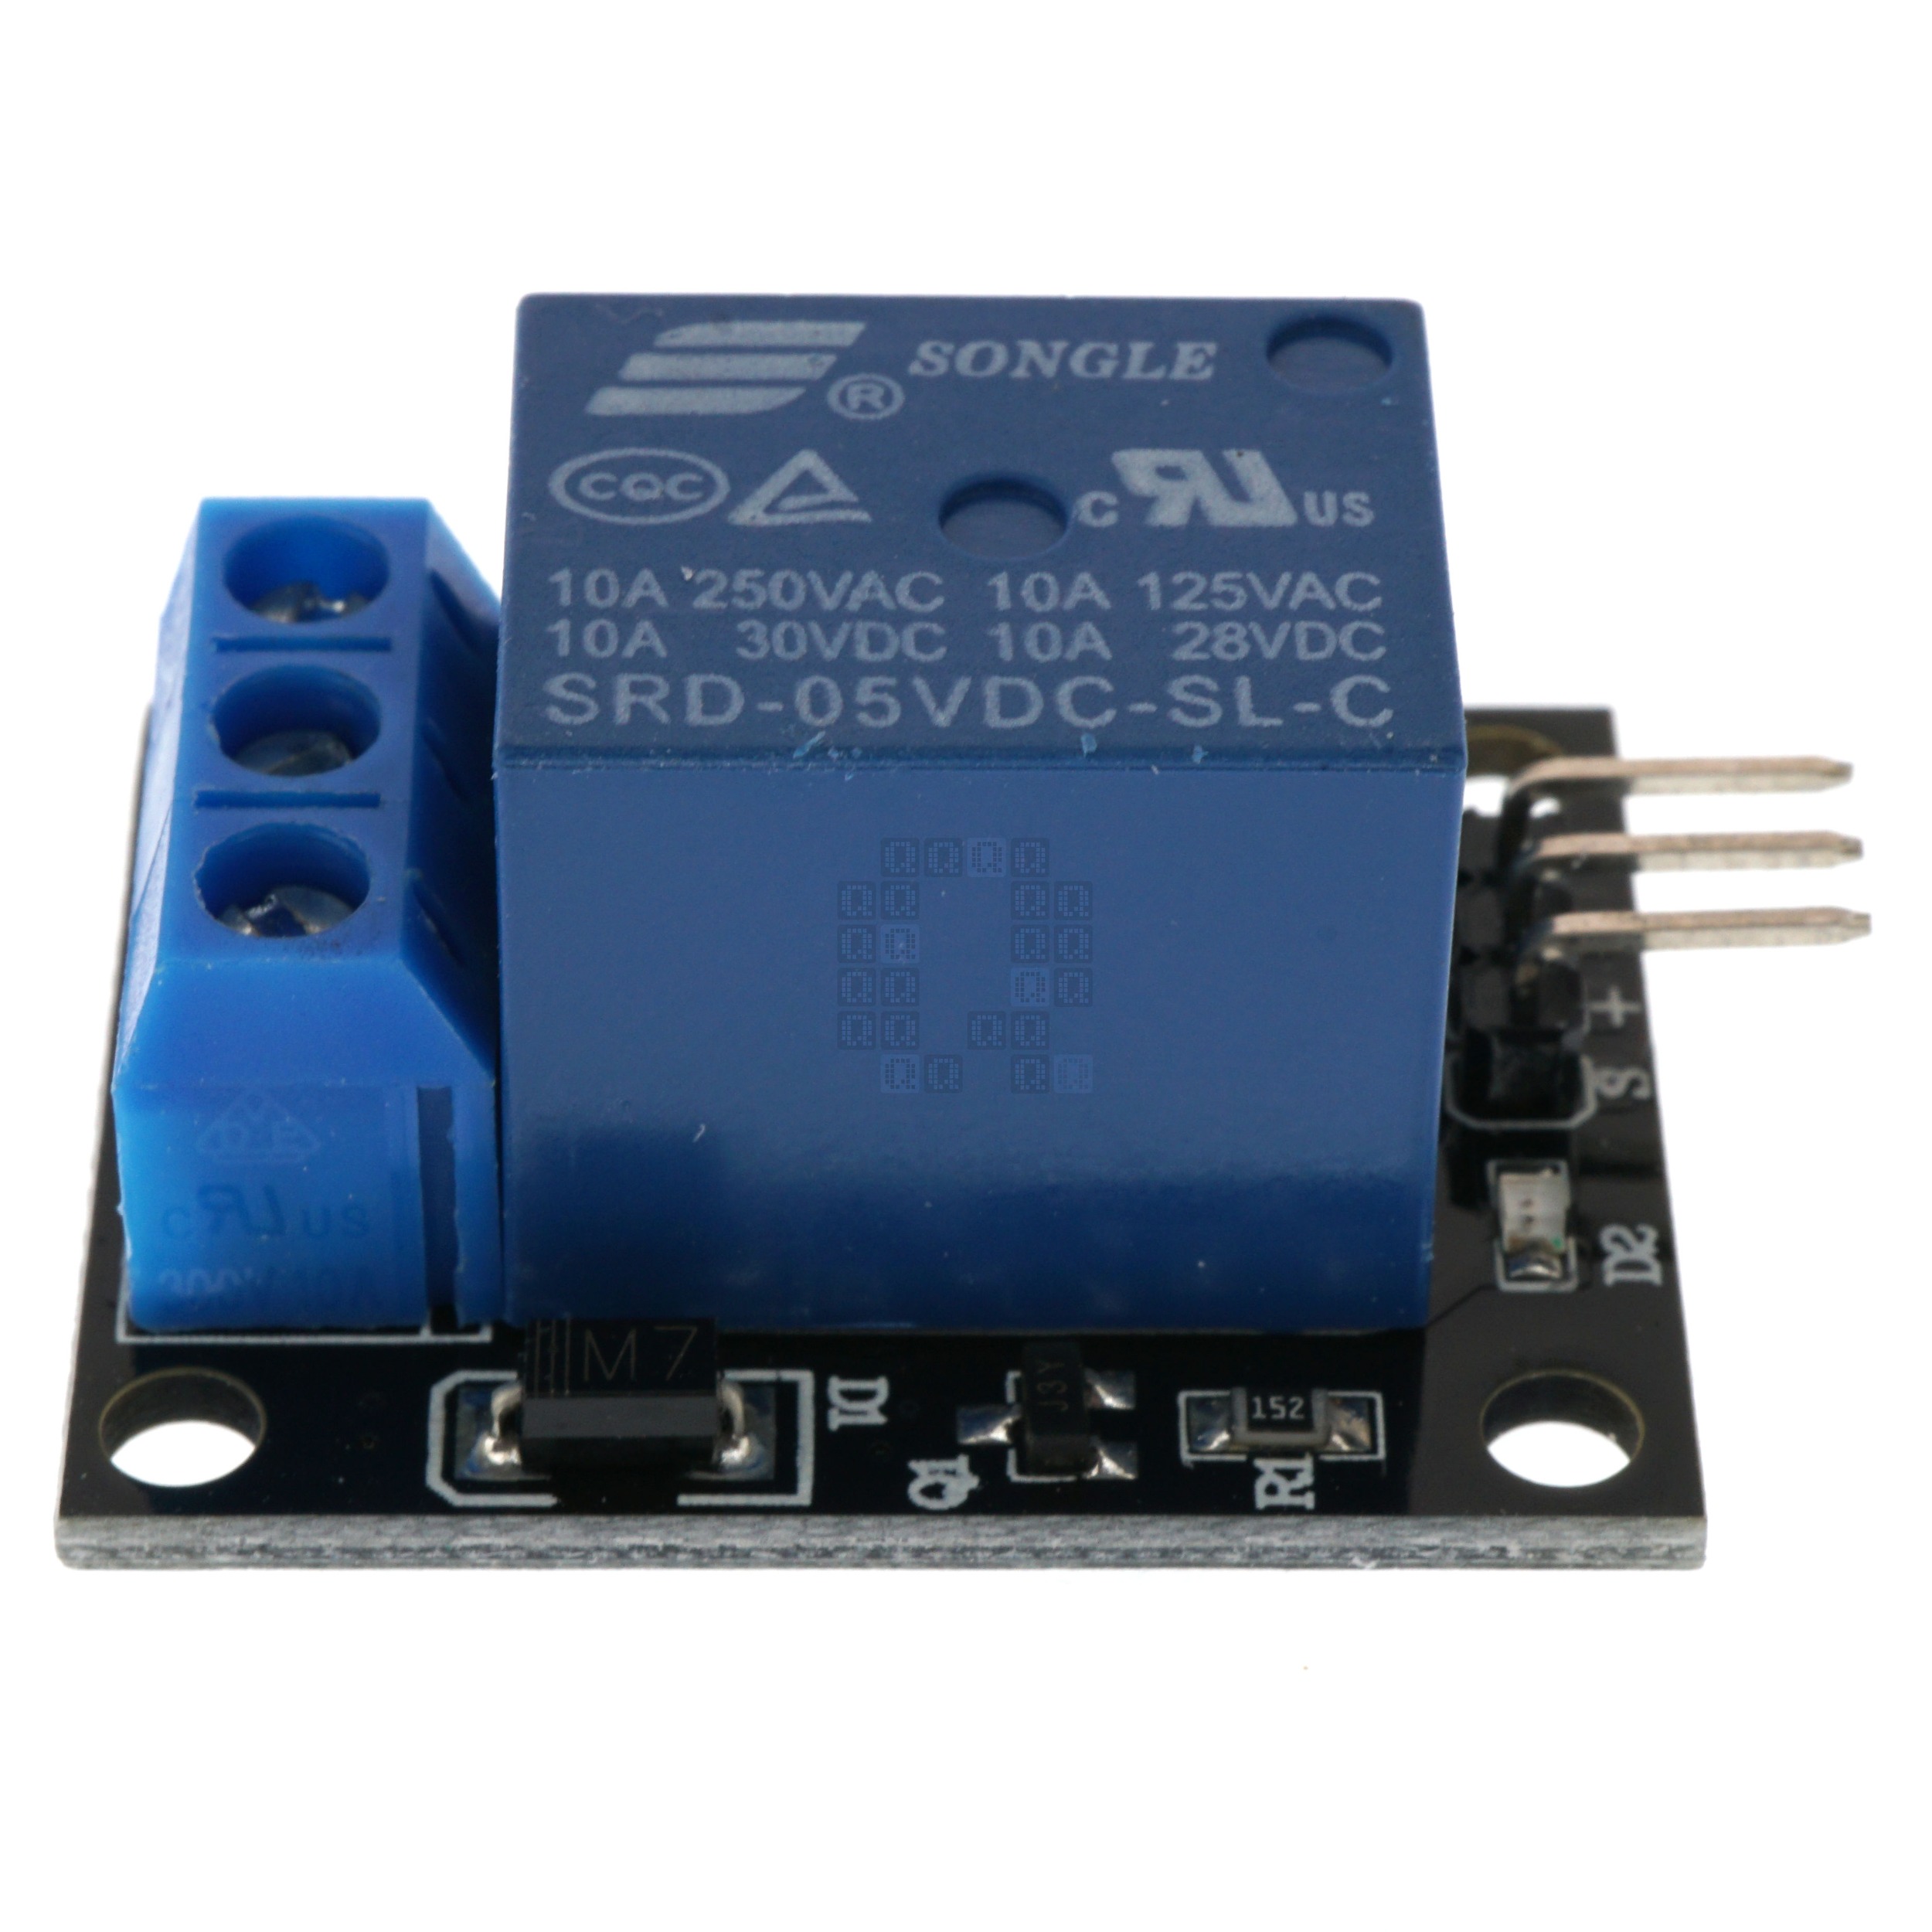 KY-019 1-Channel 5VDC Relay Module, SPDT 10 Amps @ 250VAC